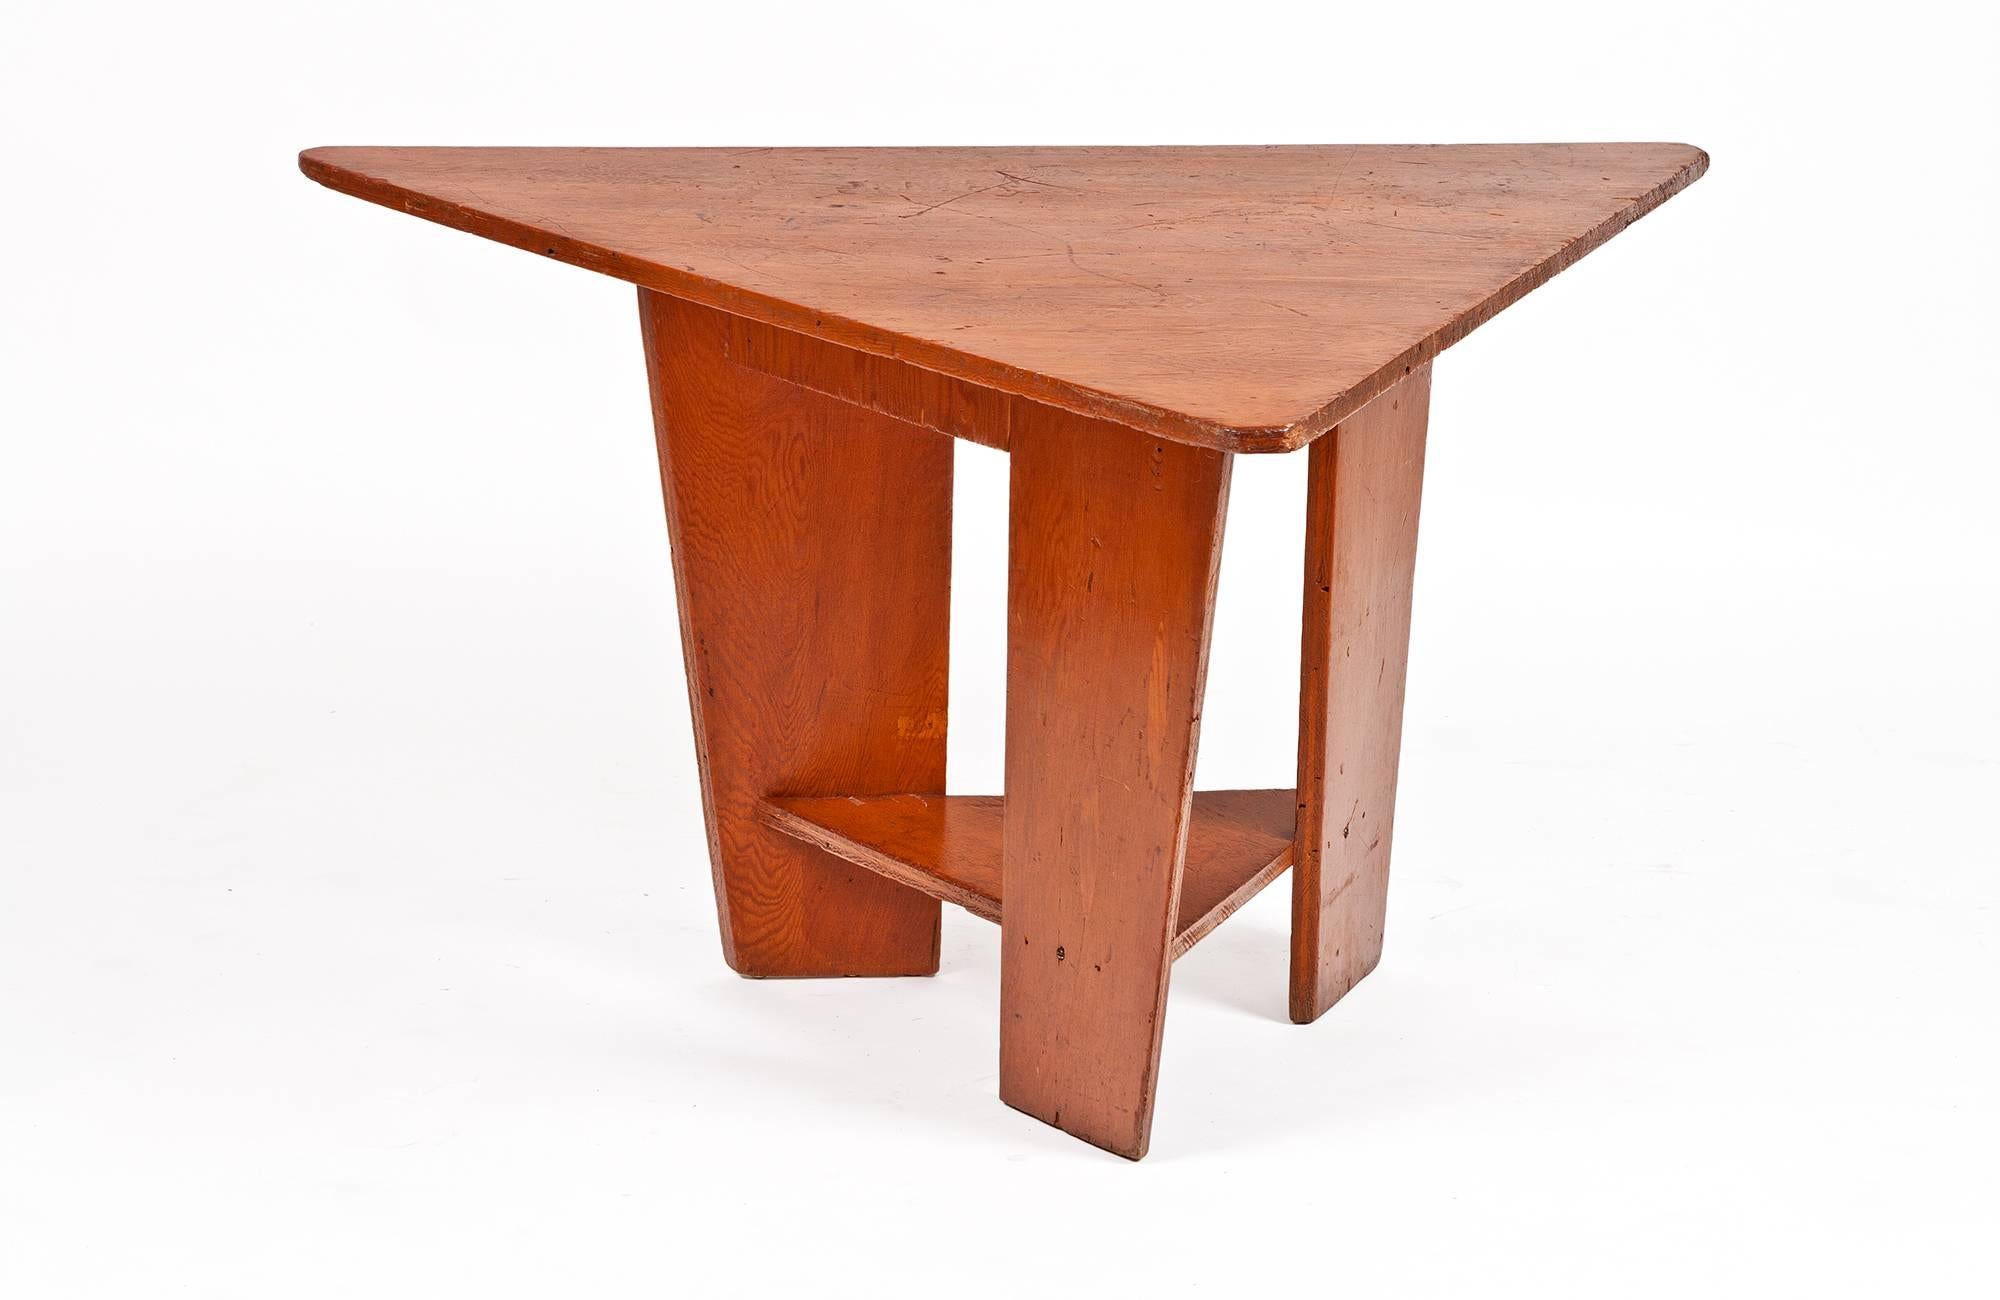 This trio of hinged bench seats and one table were designed by Frank Lloyd Wright and completed in 1951 for the Unitarian Meeting House, which Wright also designed, at 900 University Bay Drive, Shorewood Hills, Madison, Wisconsin. The components of